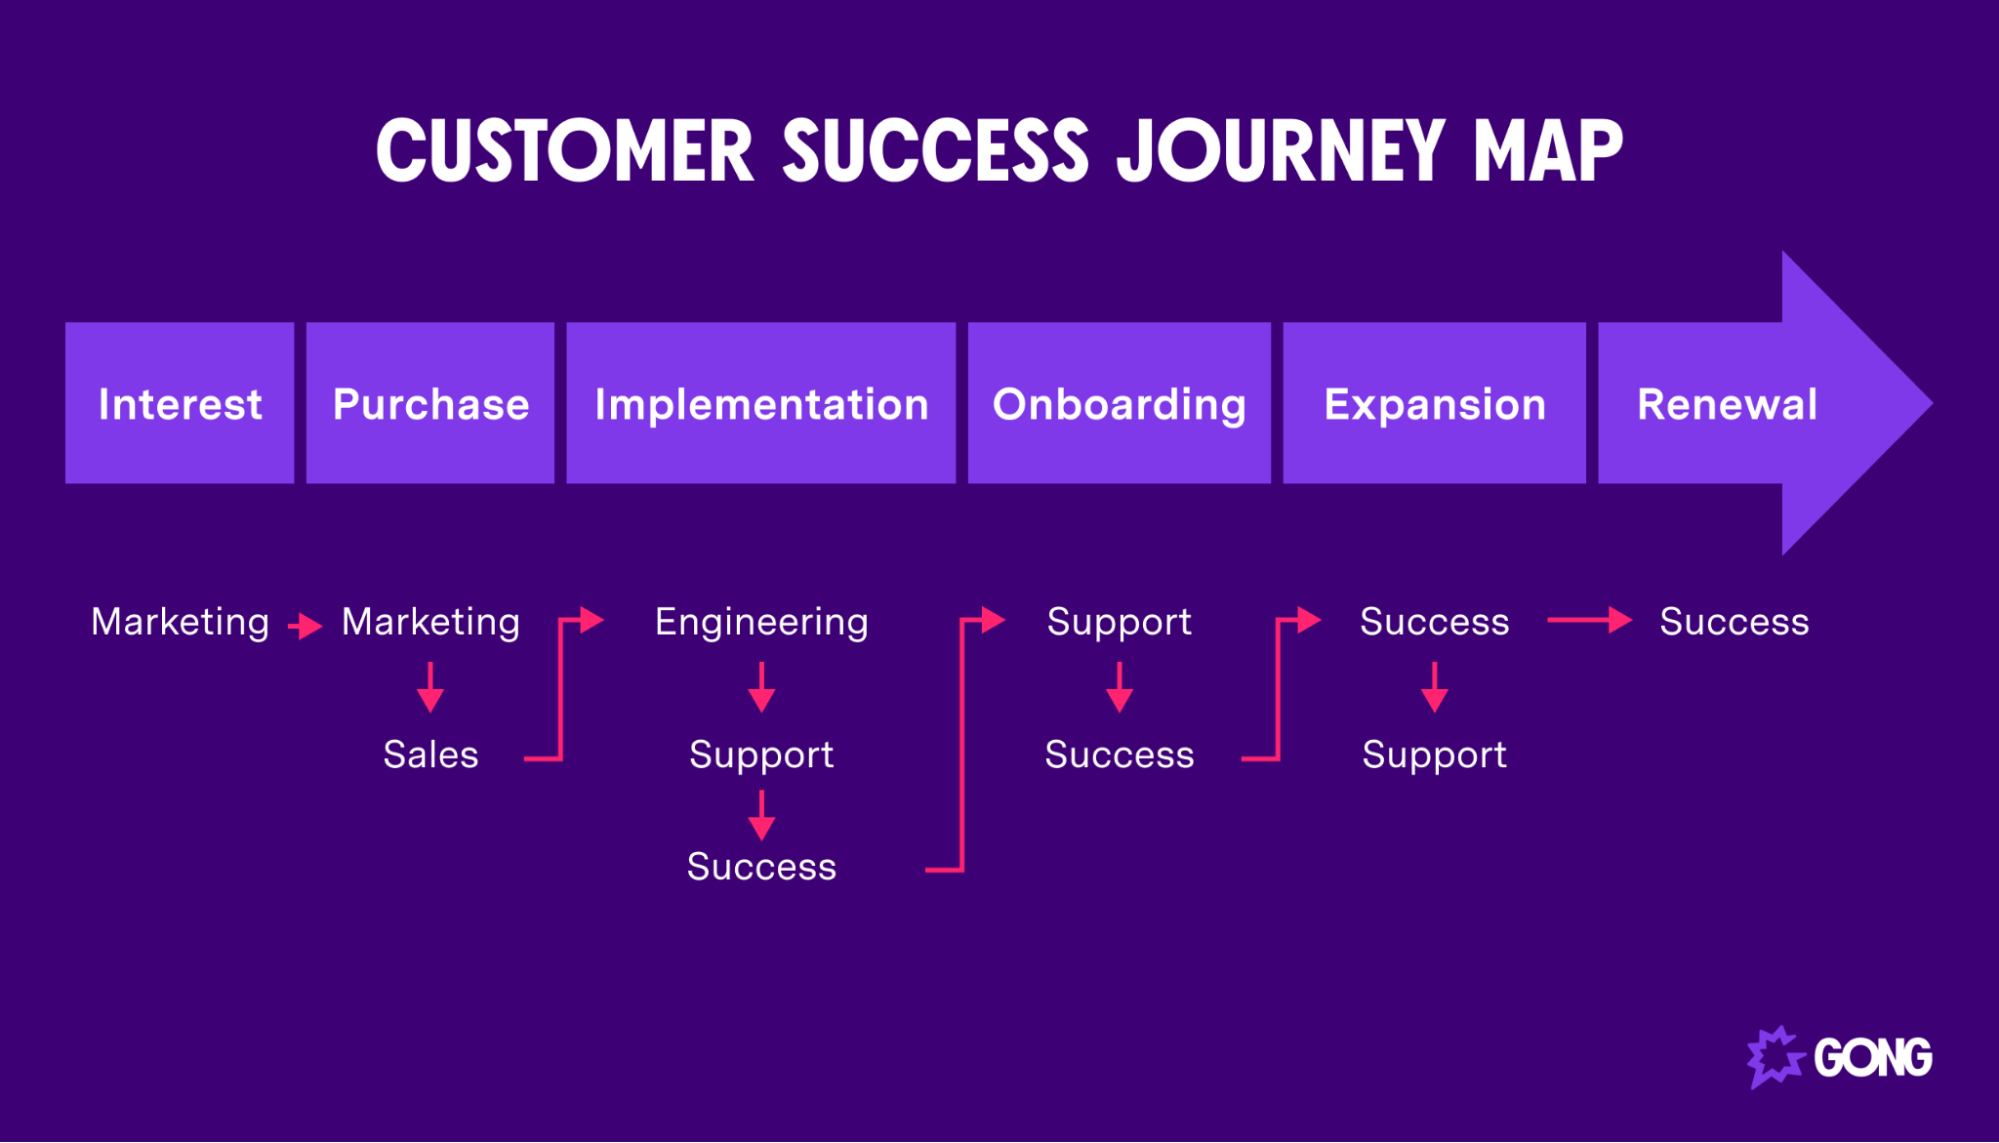 A journey map for customer success